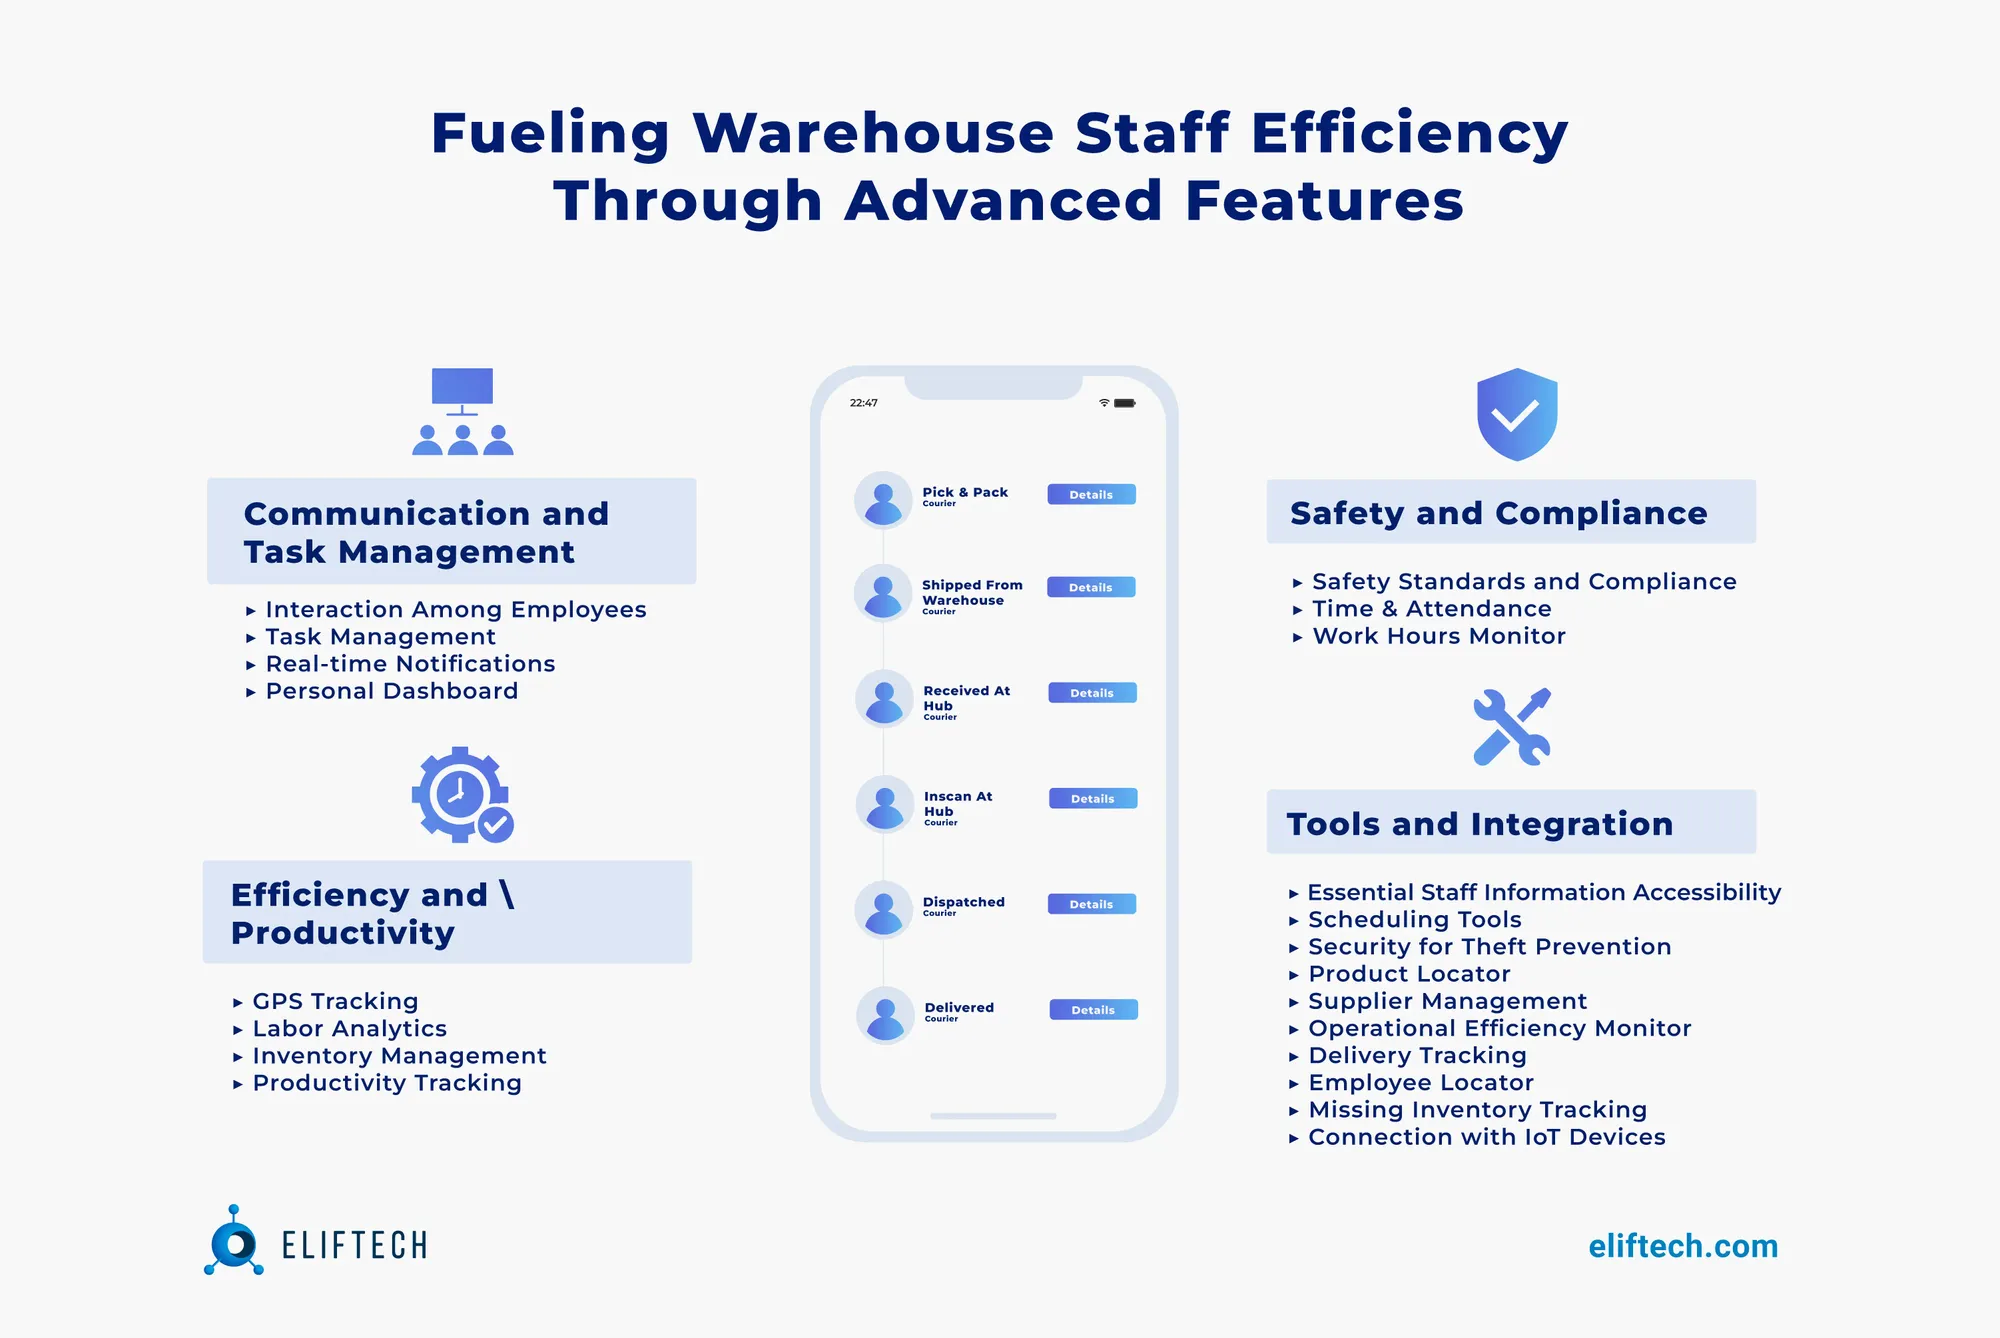 Advanced features for warehouse staff